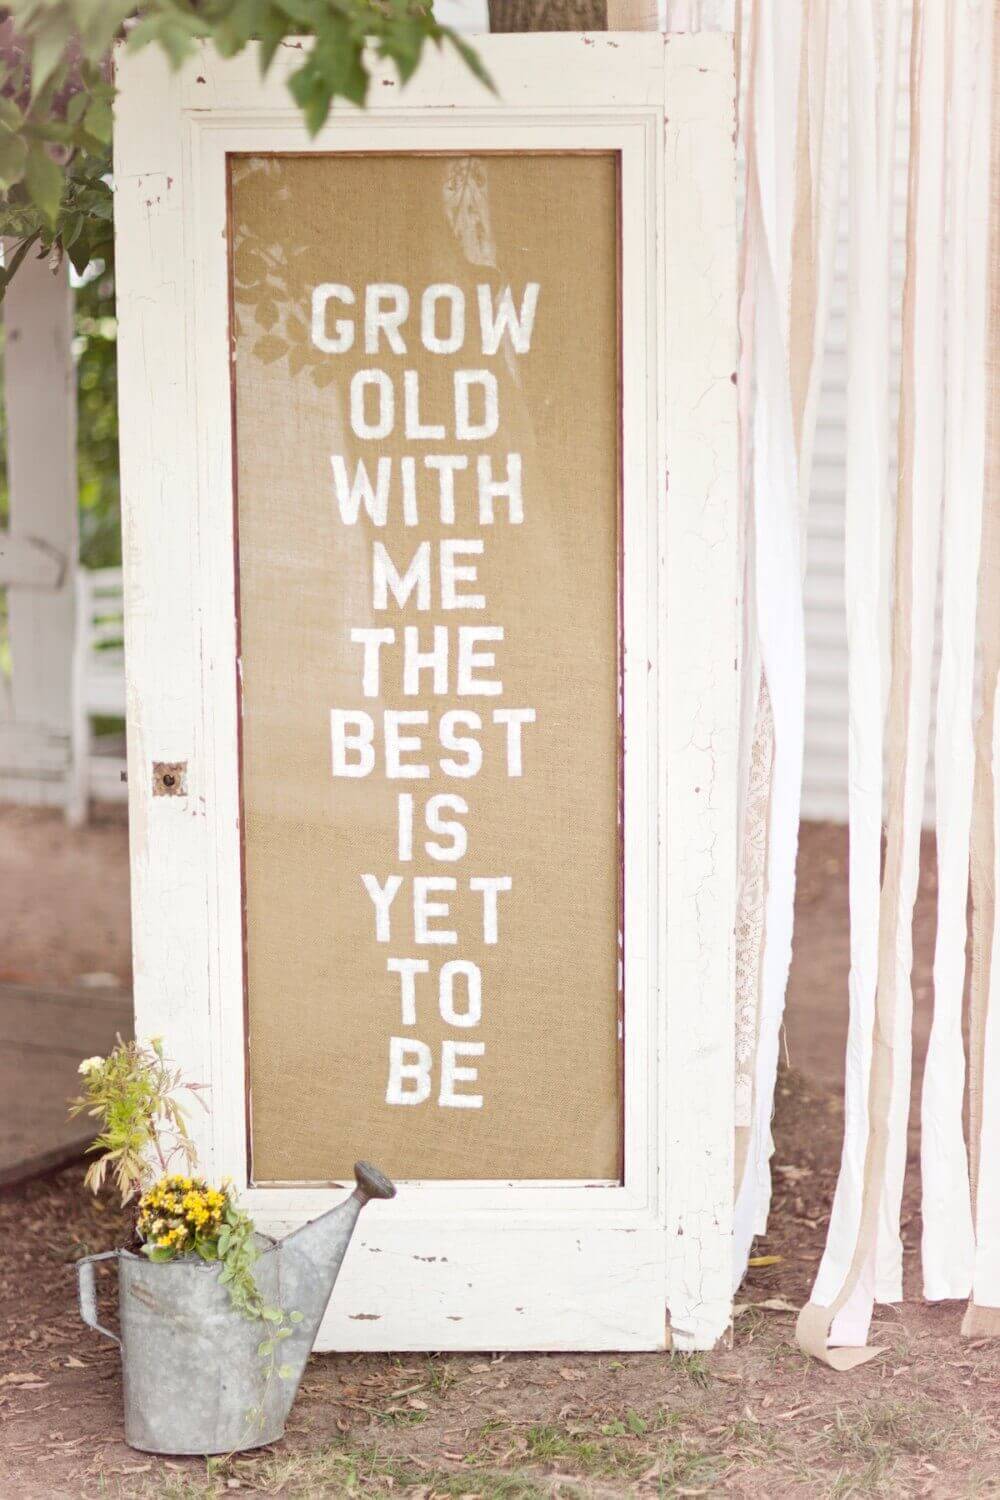 Inspiring Saying Painted on a Door | Creative Repurposed Old Door Ideas & Projects For Your Backyard